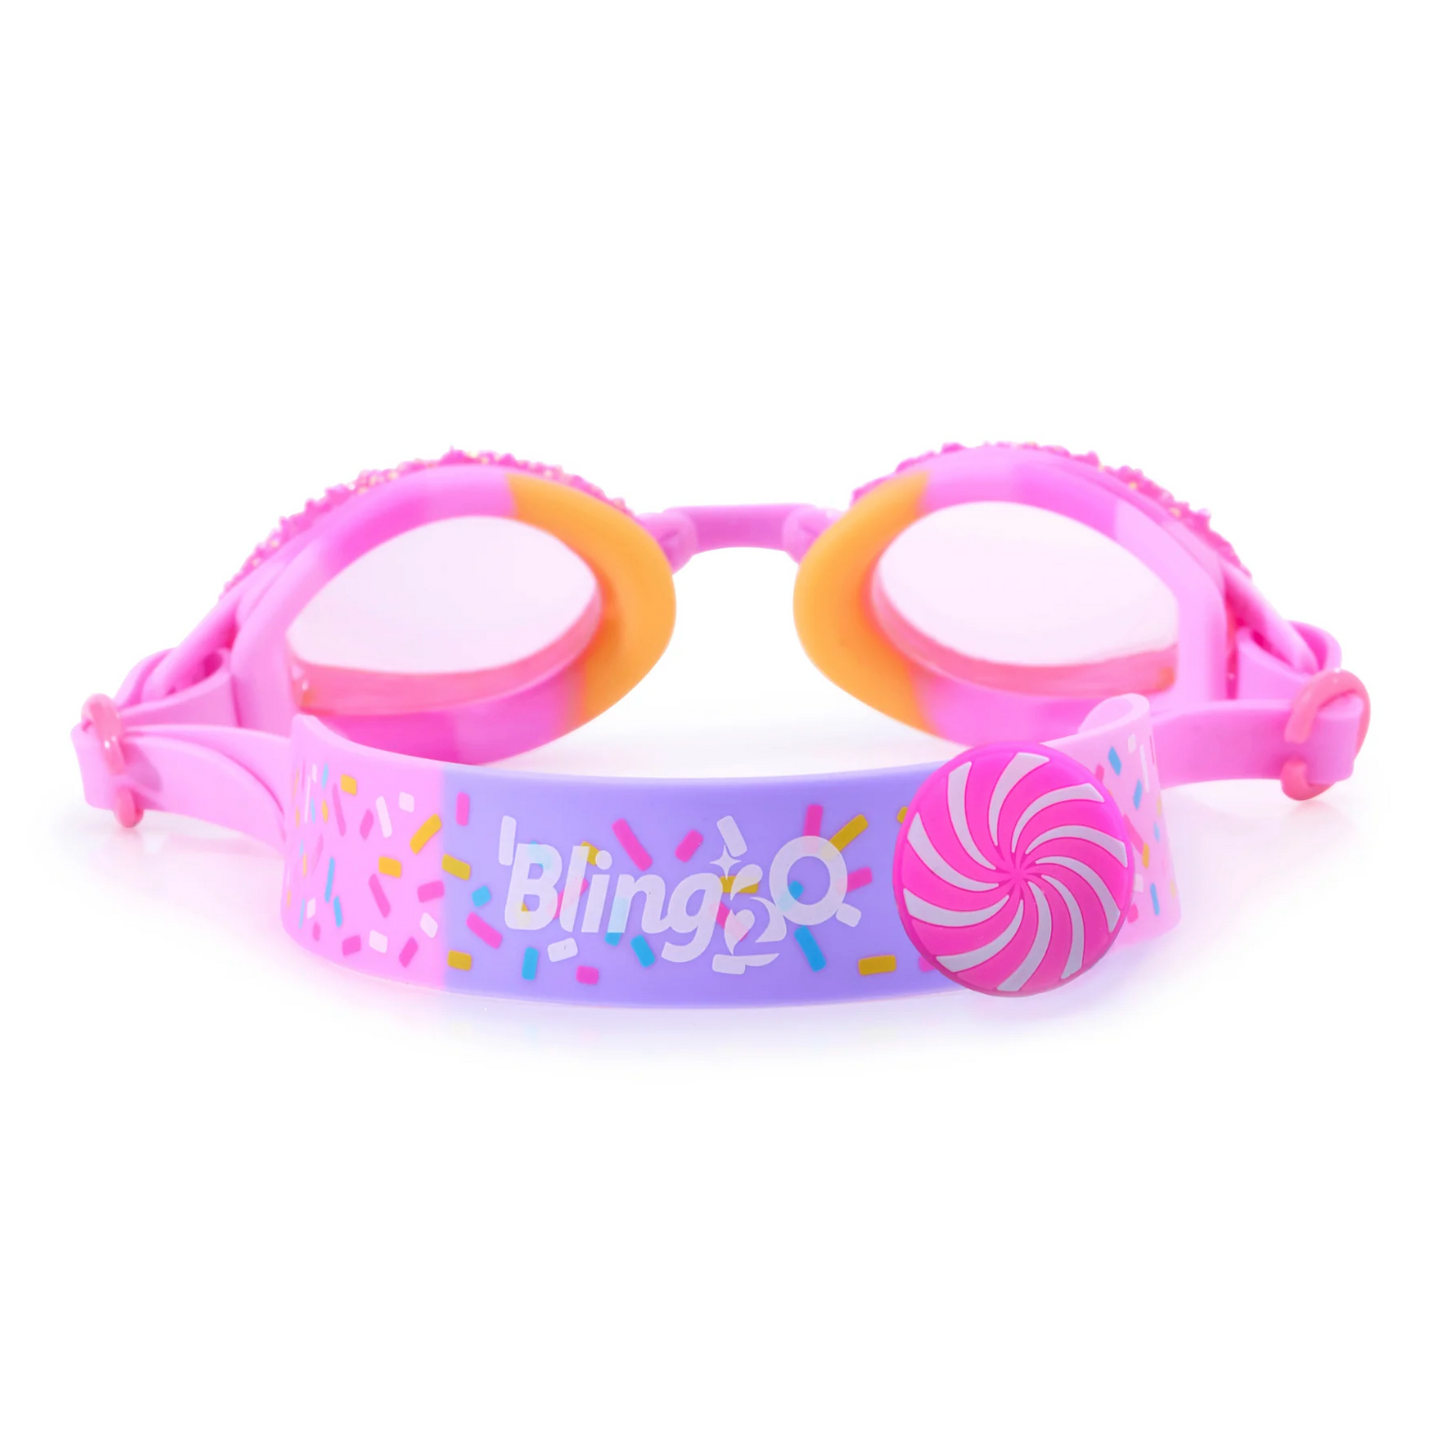 Crystal Pink Rock Candy Goggles